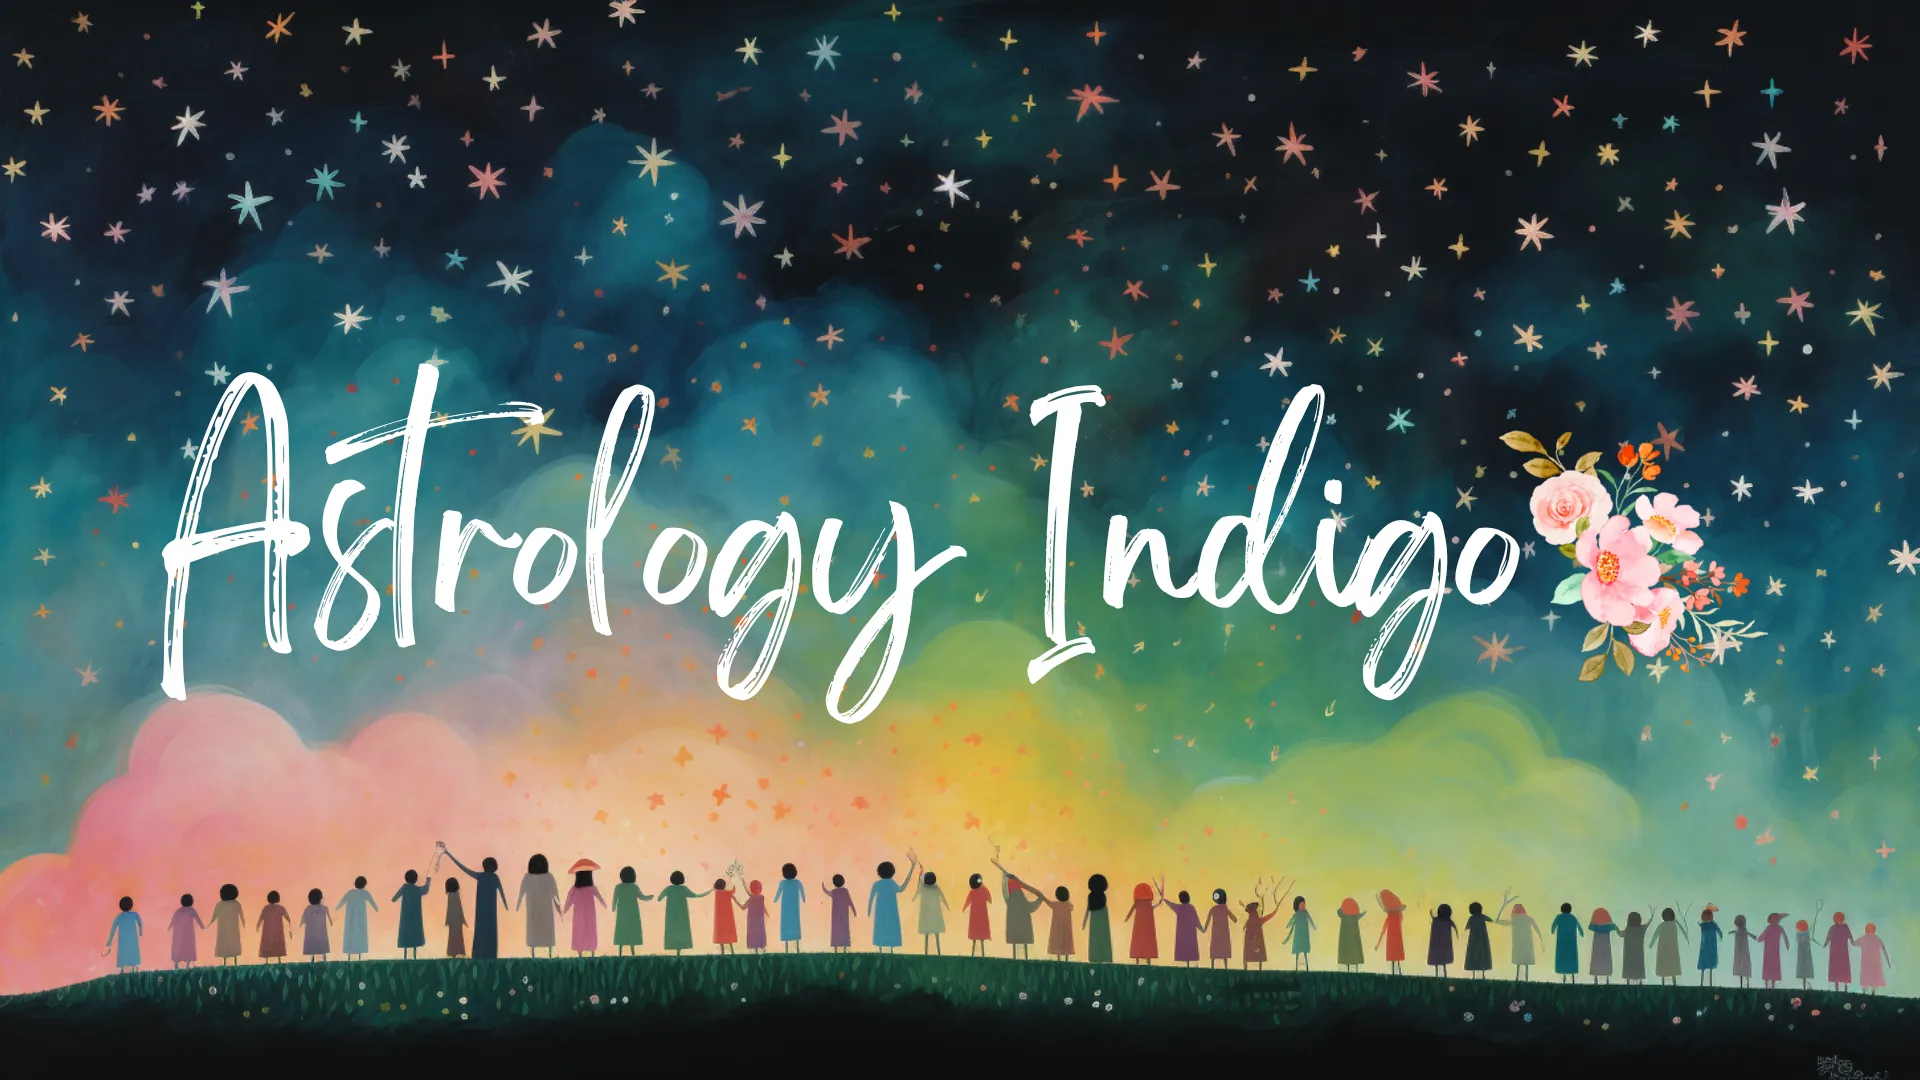 A diverse and inclusive group of humans stand together and gaze up at the stars. It says Astrology Indigo in the stars.